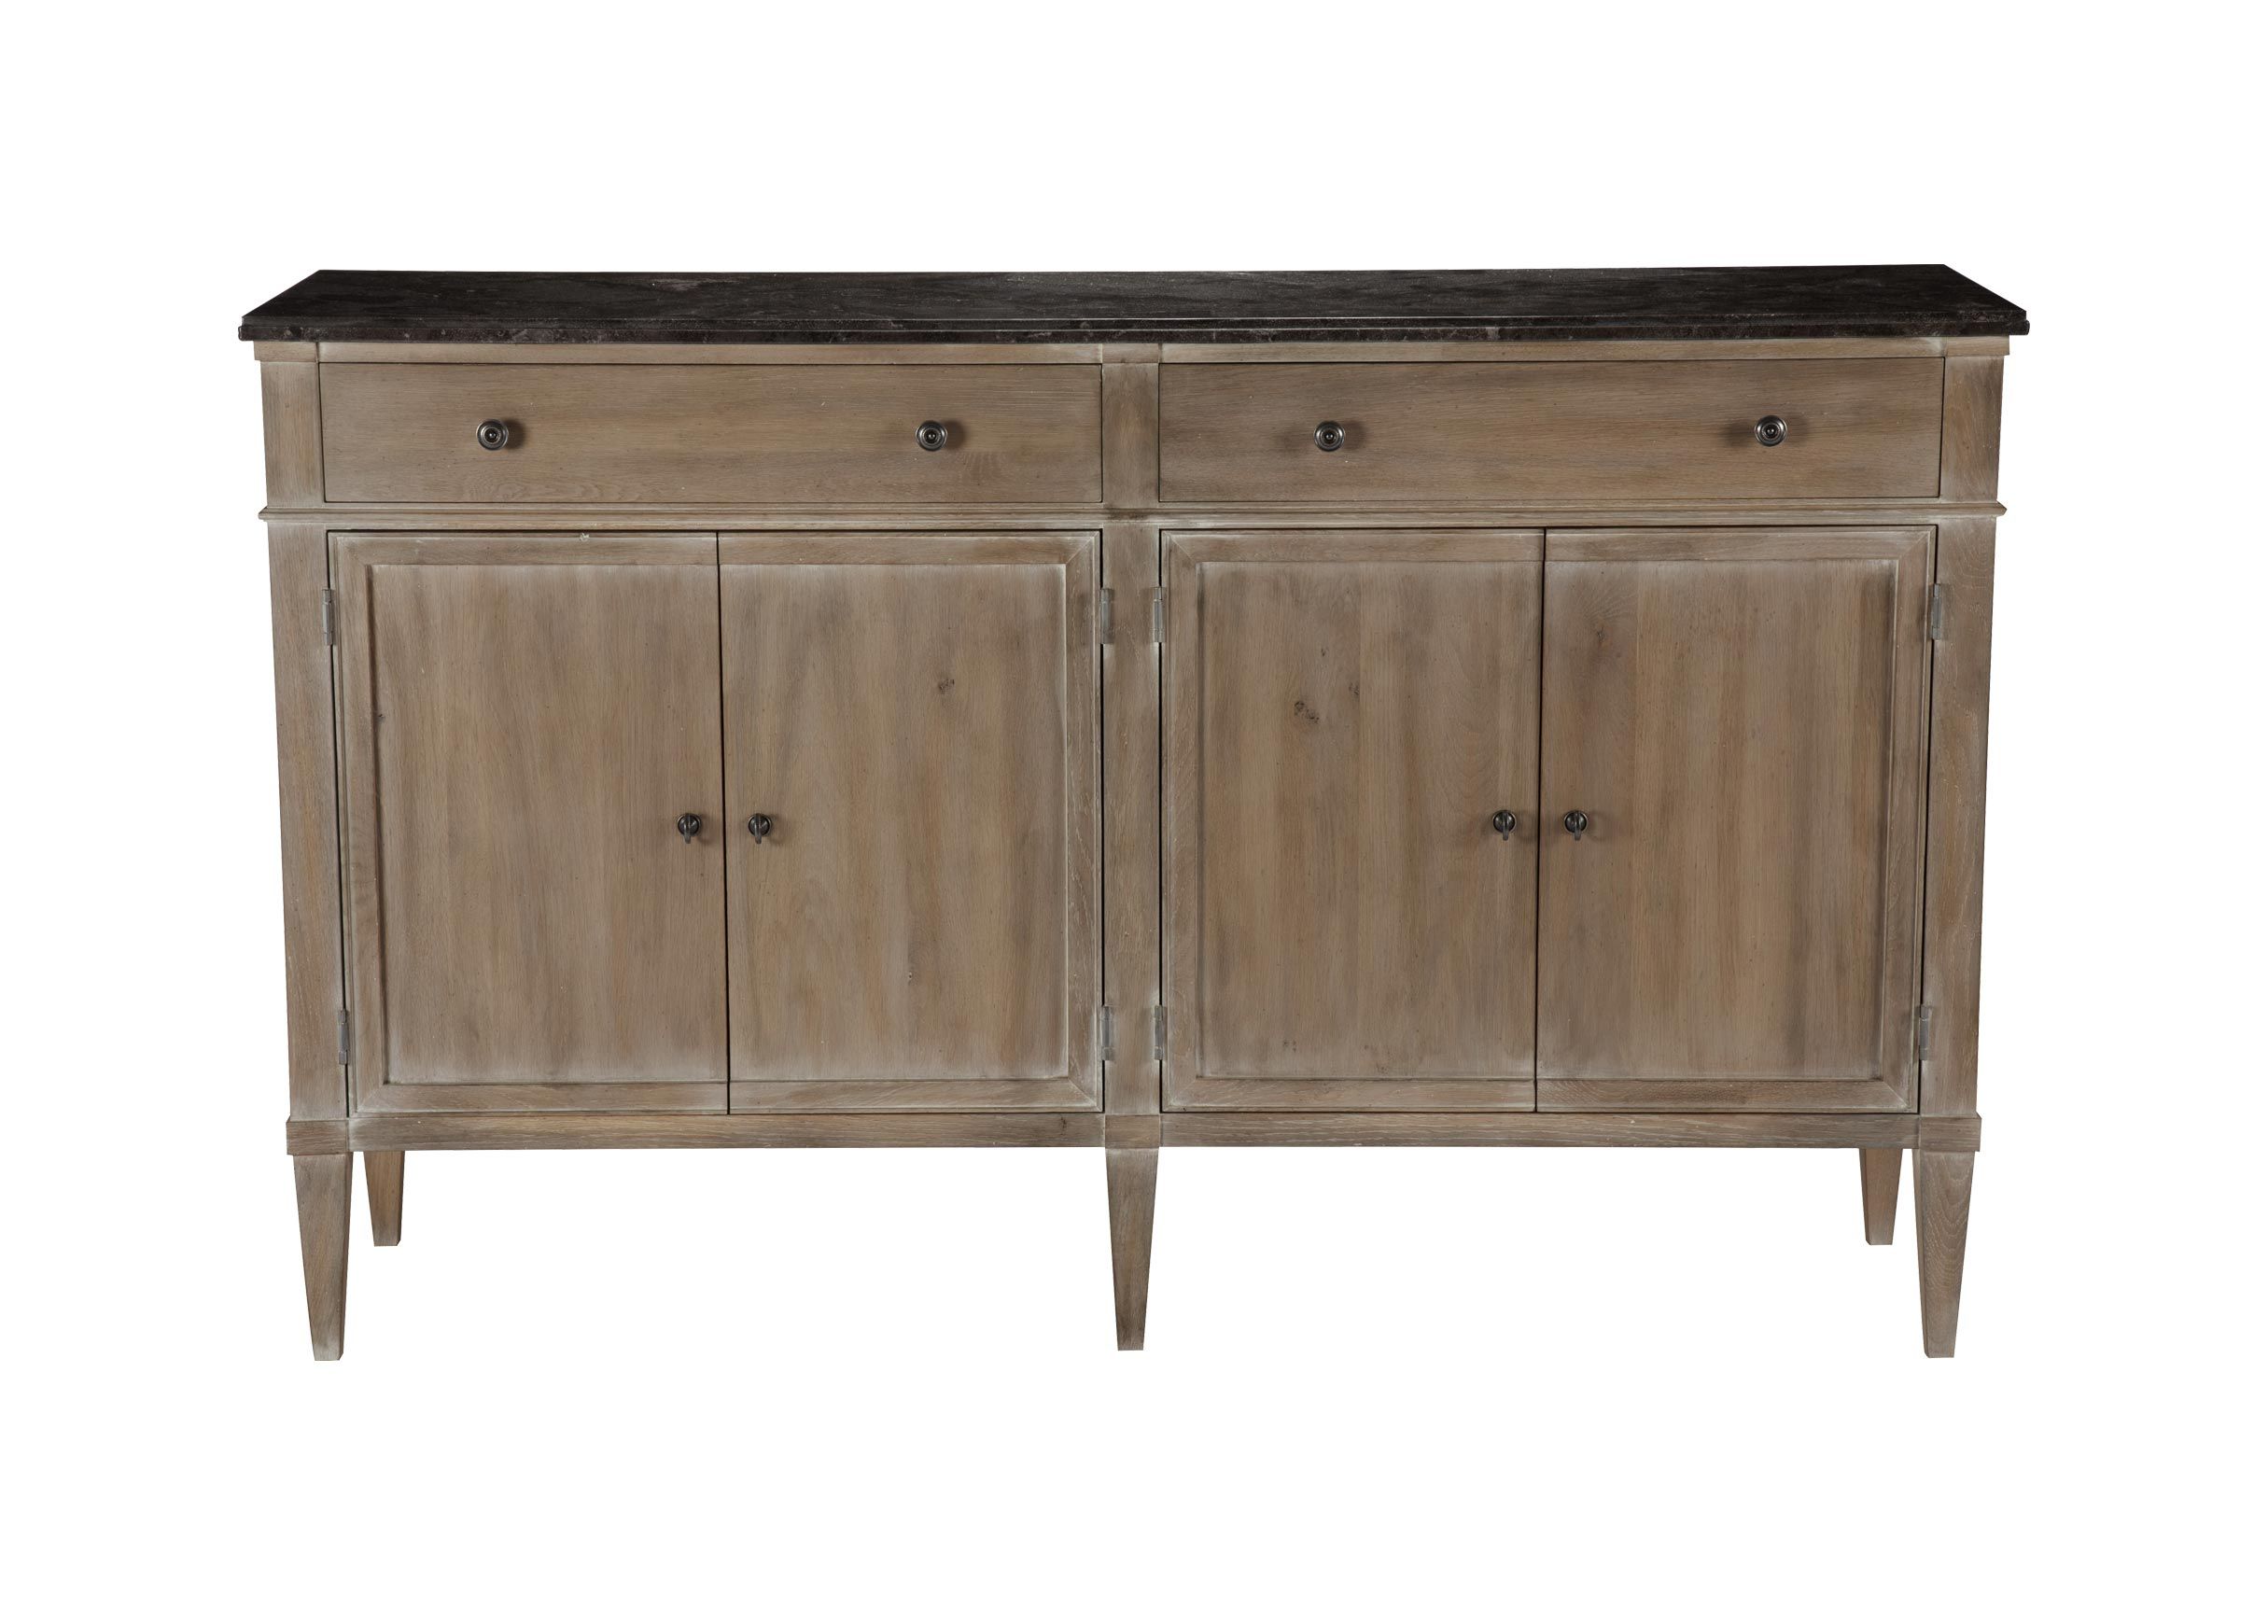 Cressida Buffet | Buffets, Sideboards & Servers | Ethan Allen Intended For White Geometric Buffets (View 14 of 30)